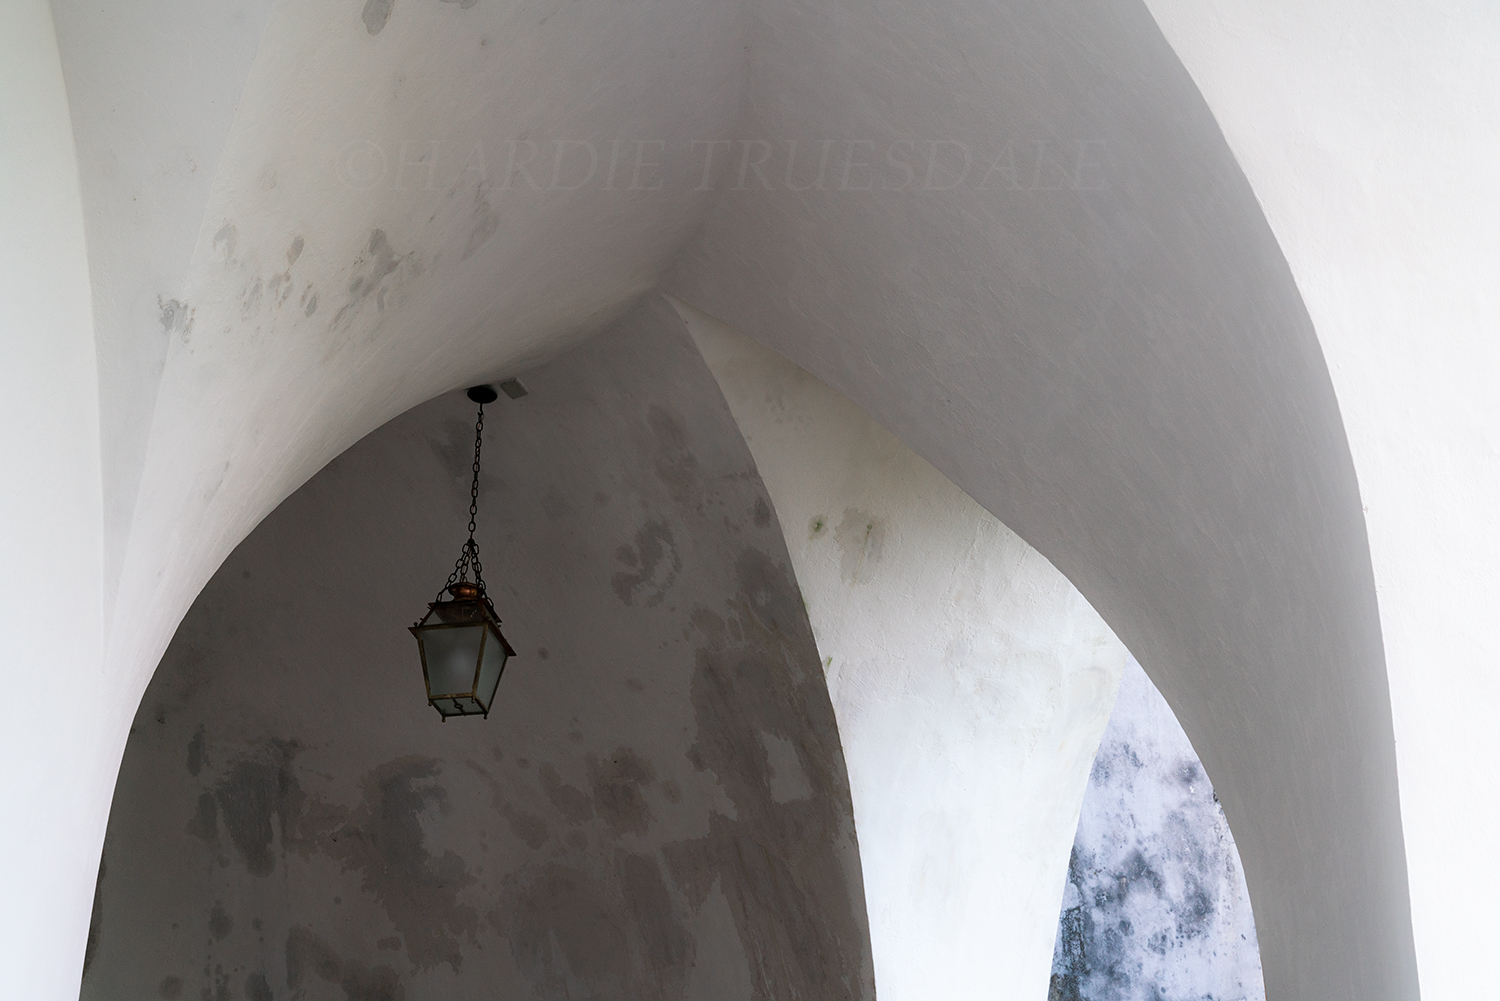 PT#021 "Arched Curves" Pena Palace, Sintra